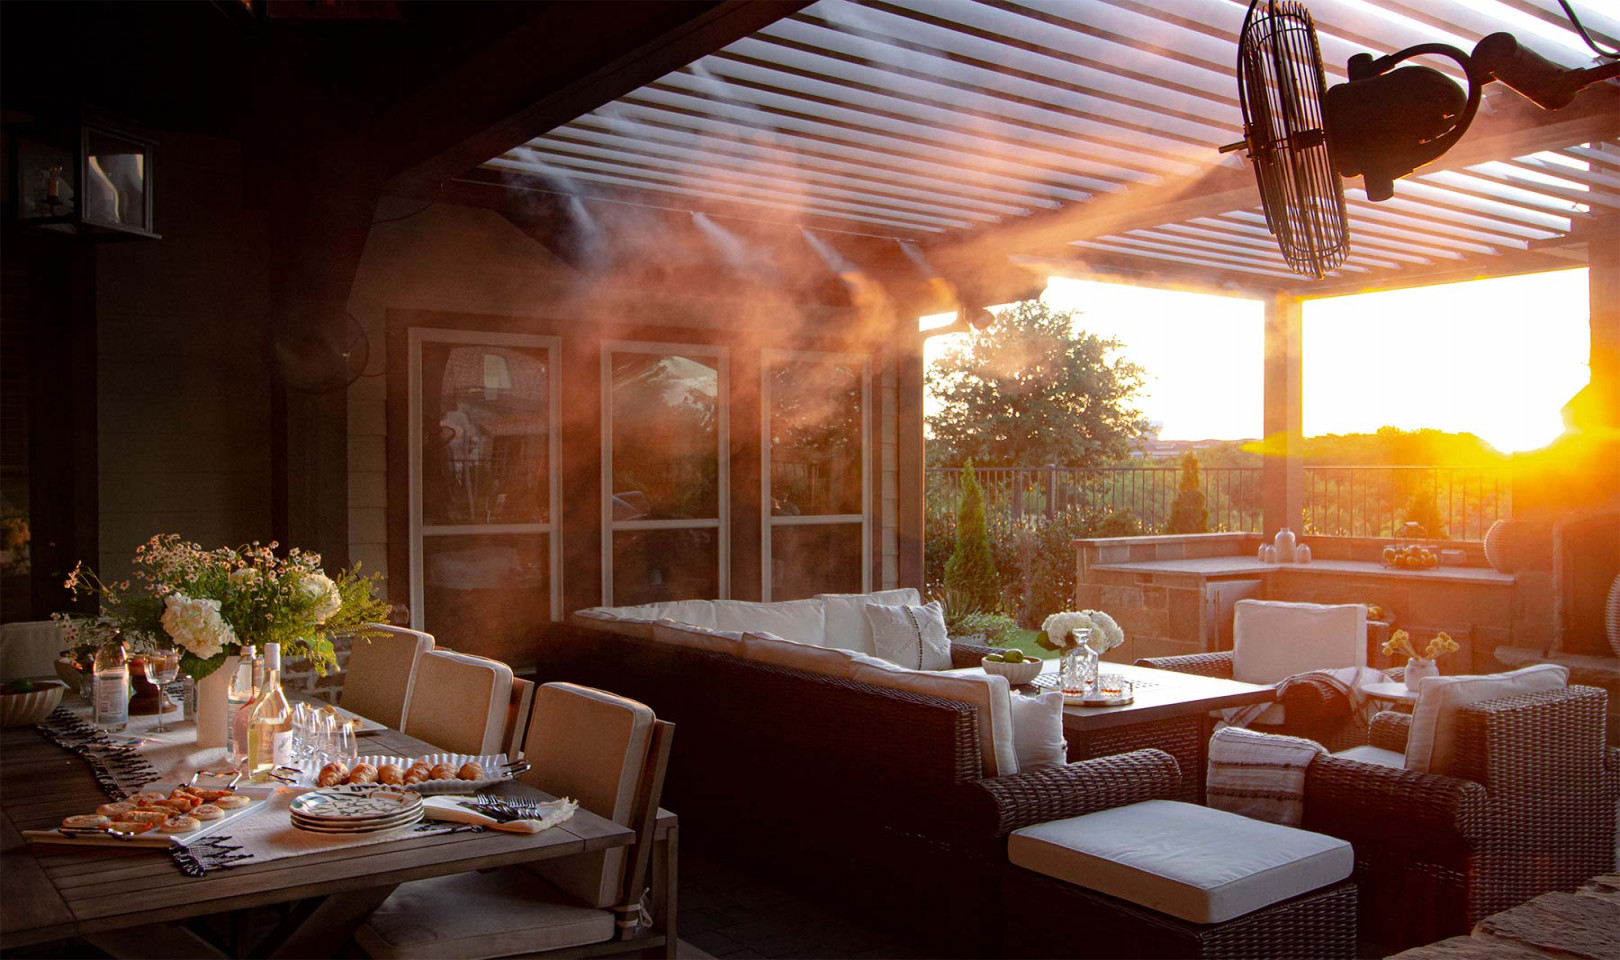 Misting Systems For Patios